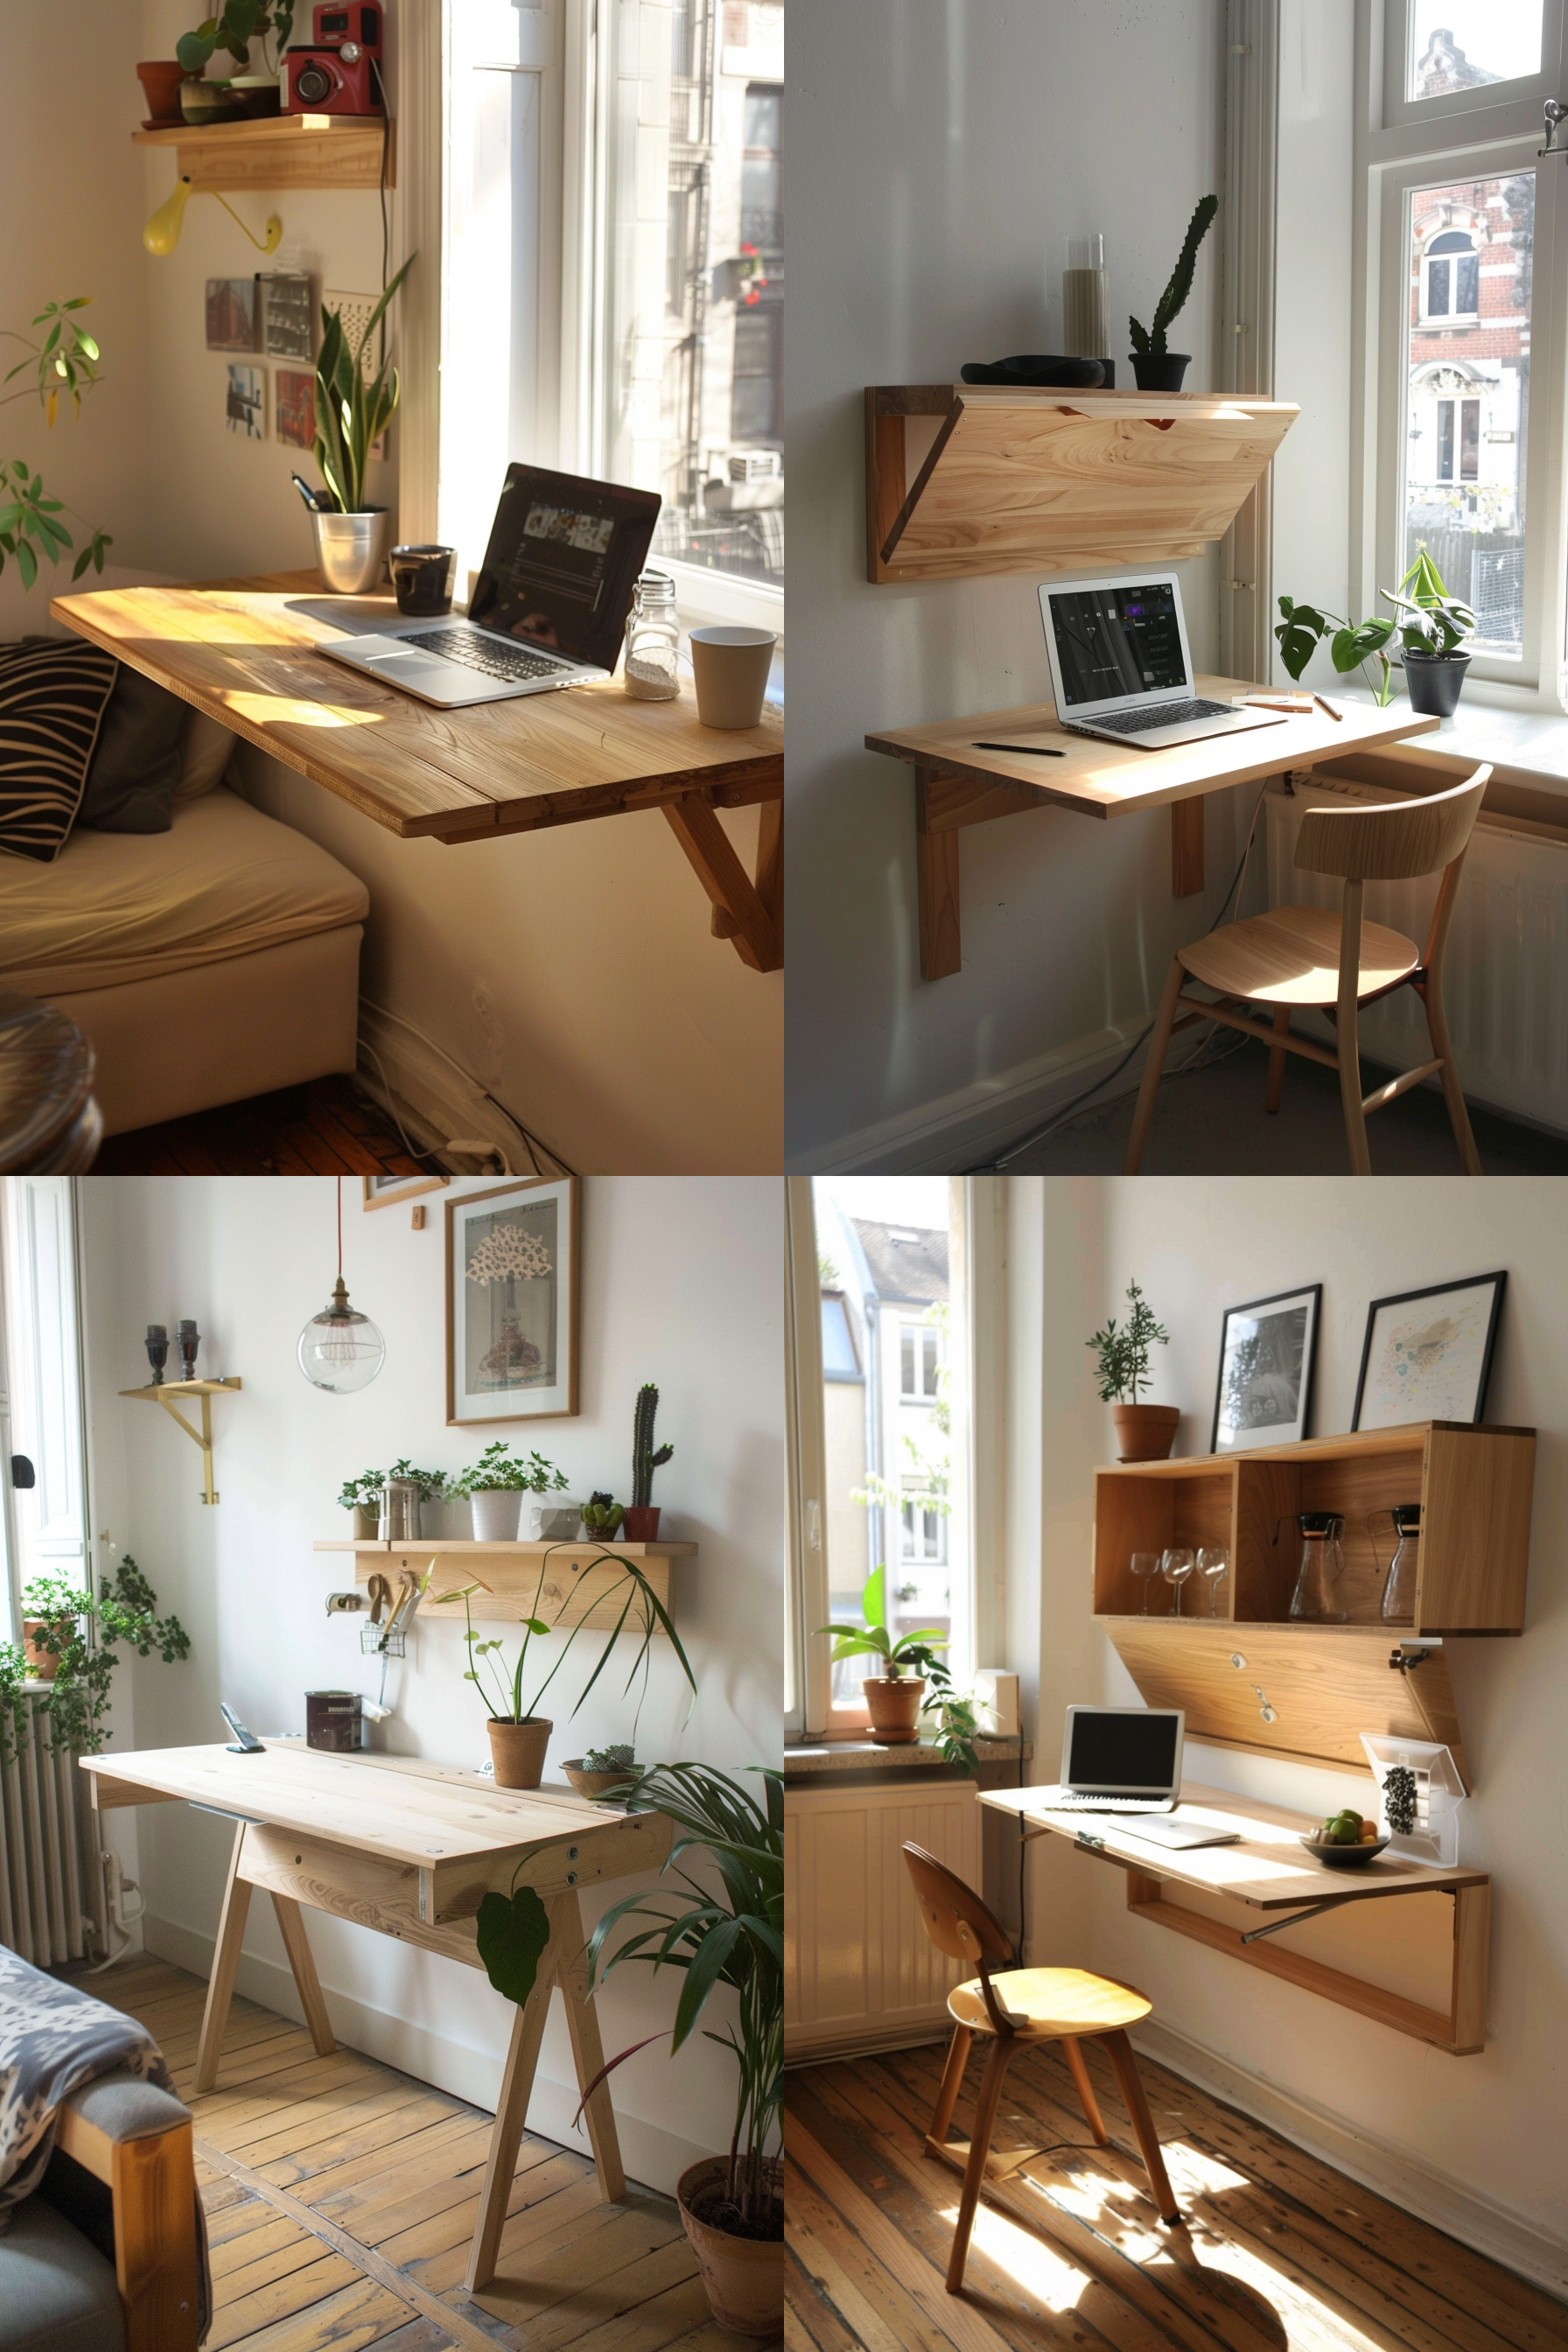 Four images of space-saving wall-mounted wooden desks in various fold-out designs, set in sunny, plant-decorated rooms.